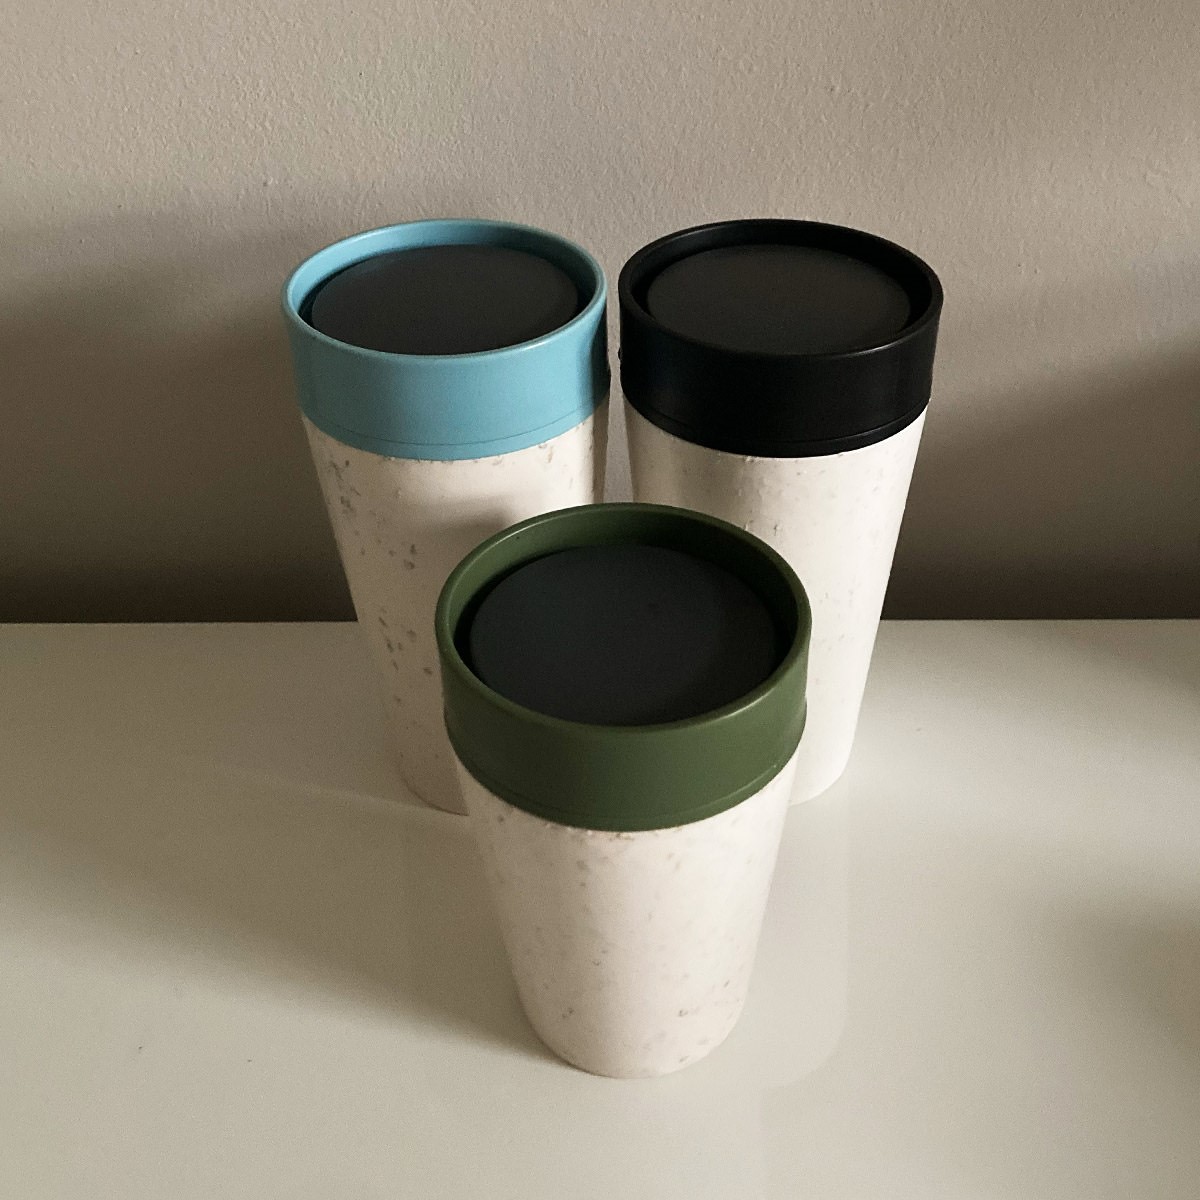 Superfried – Walk the Talk. Testing eco friendly reusable cups – Circular & Co cups. Continuing my path towards eco living.